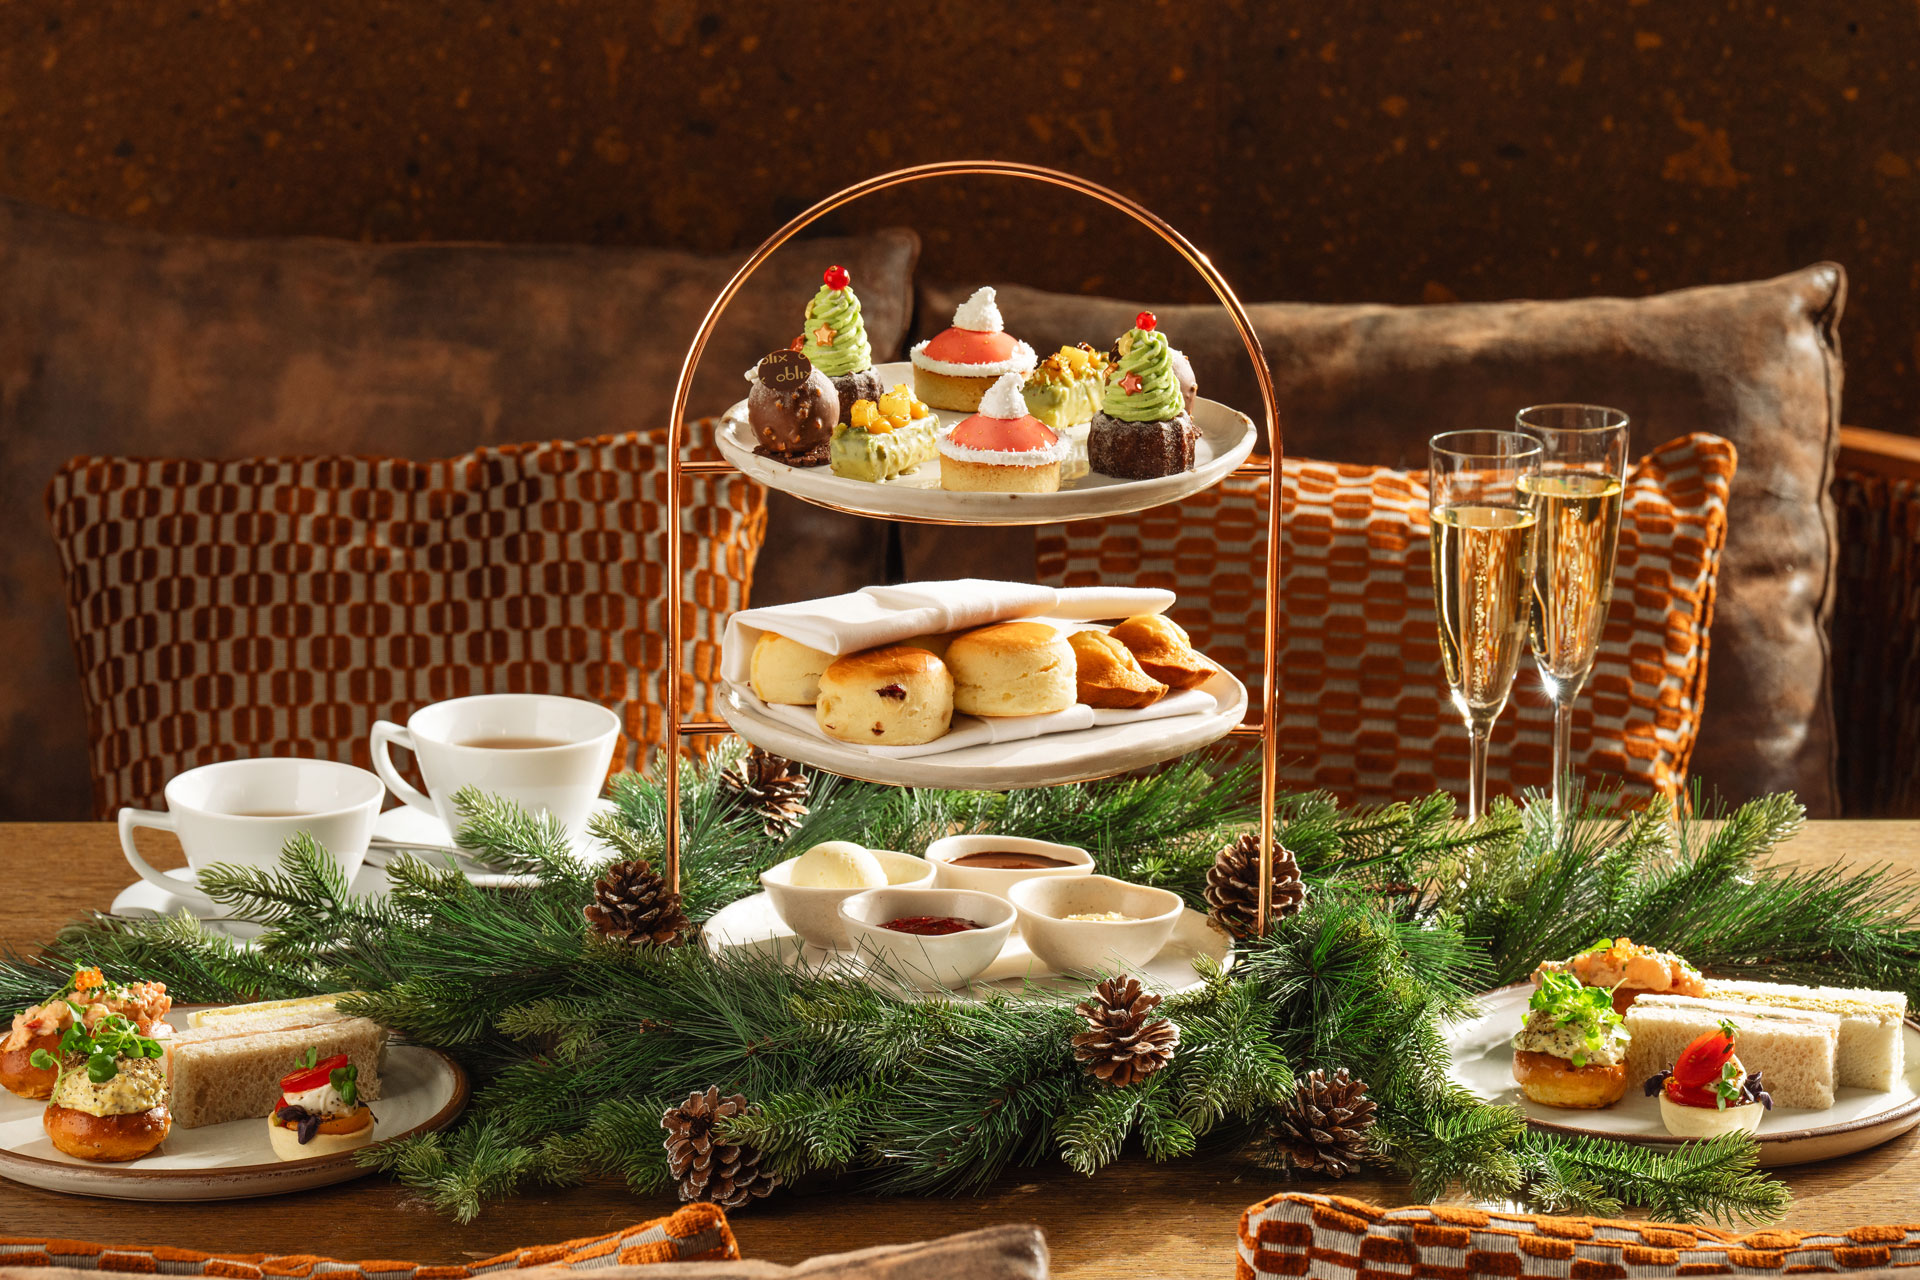 Festive afternoon tea at The Shard